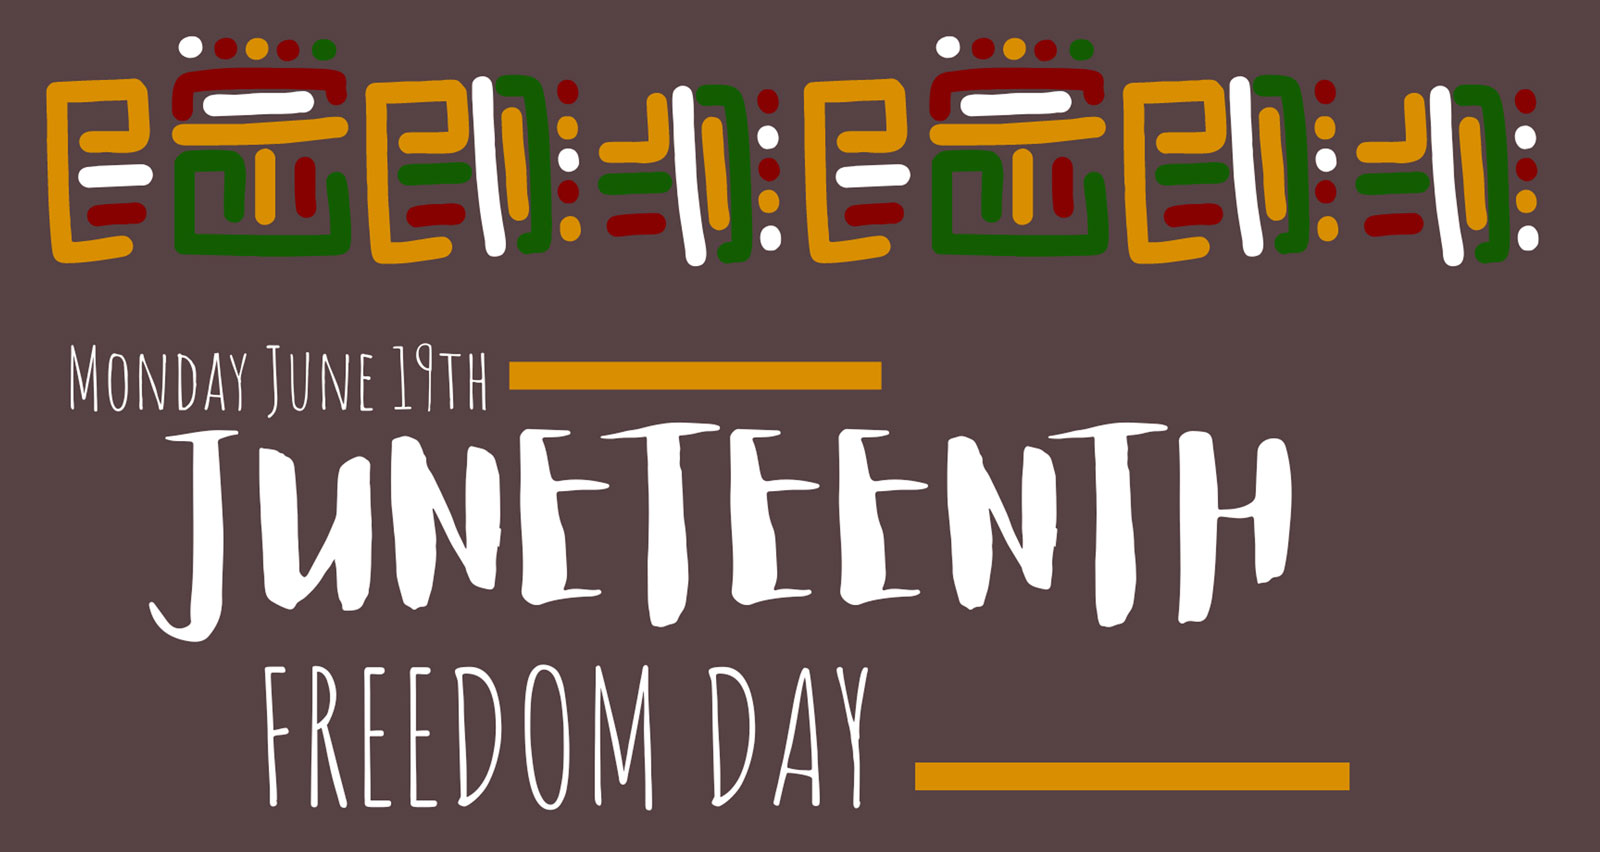 Monday, June 19th is Juneteenth Freedom Day